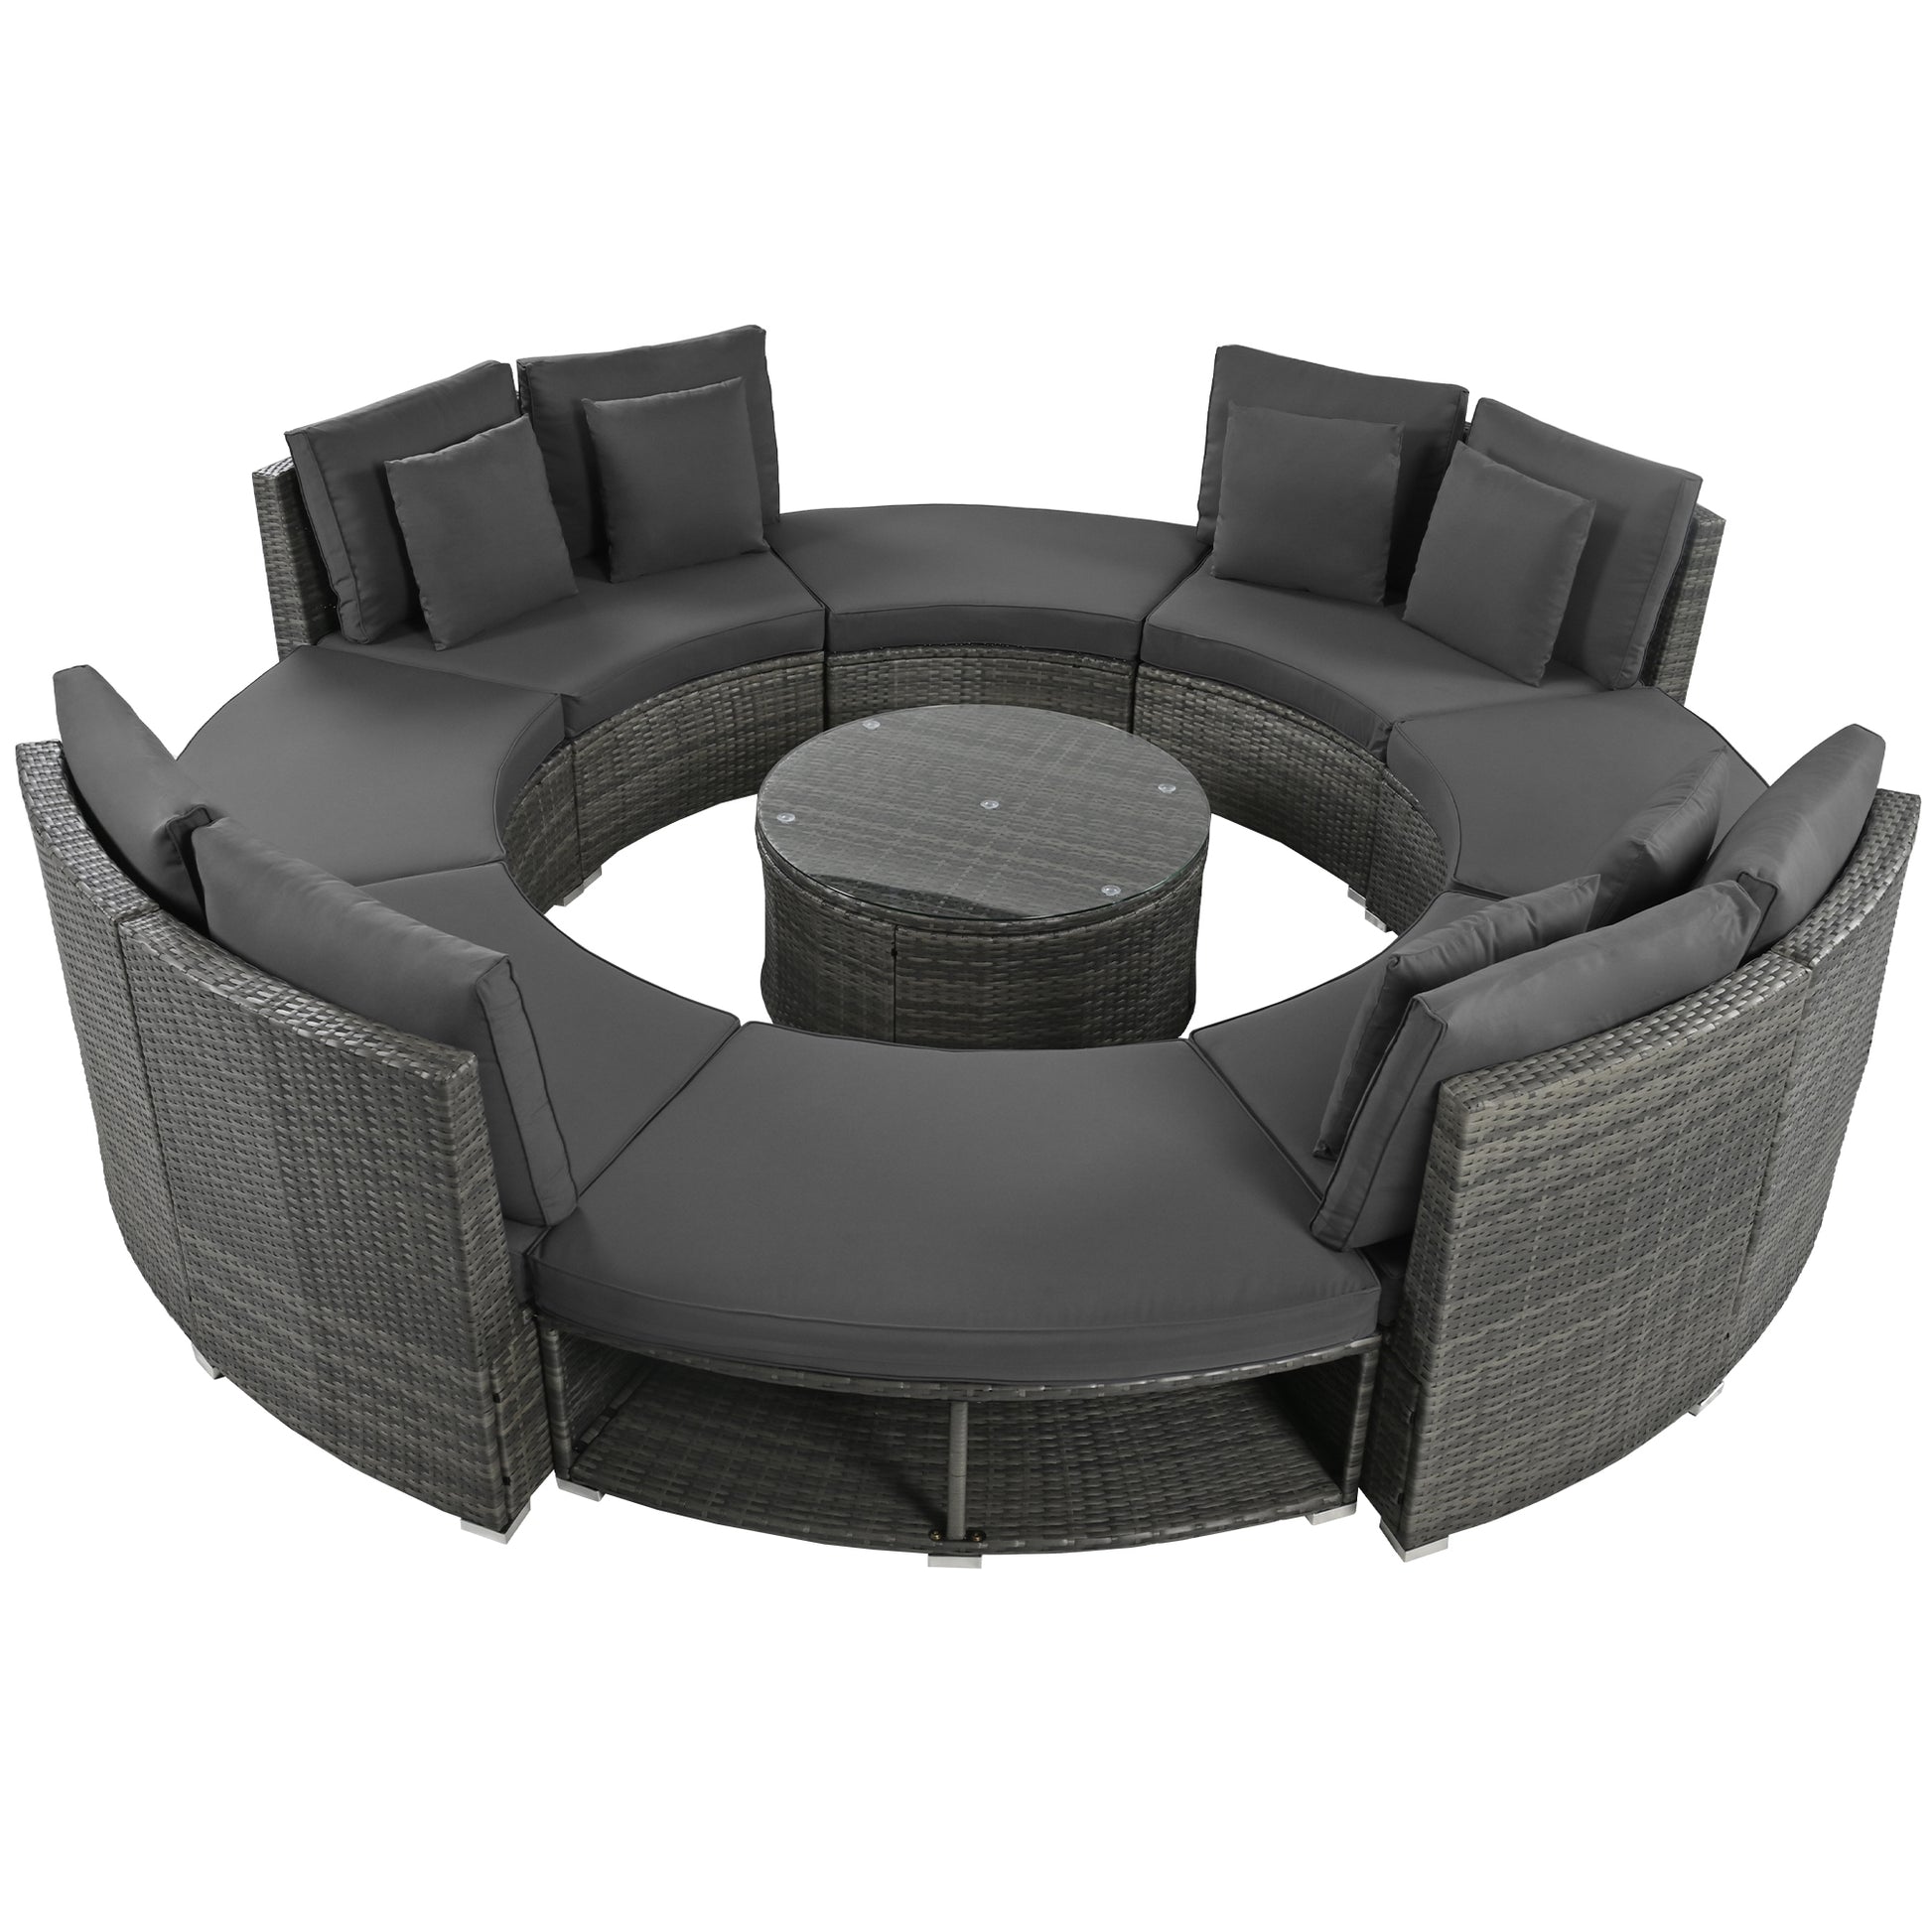 9-Piece Outdoor Patio Furniture Luxury Circular Outdoor Sofa Set Rattan Wicker Sectional Sofa Lounge Set with Tempered Glass Coffee Table MLNshops